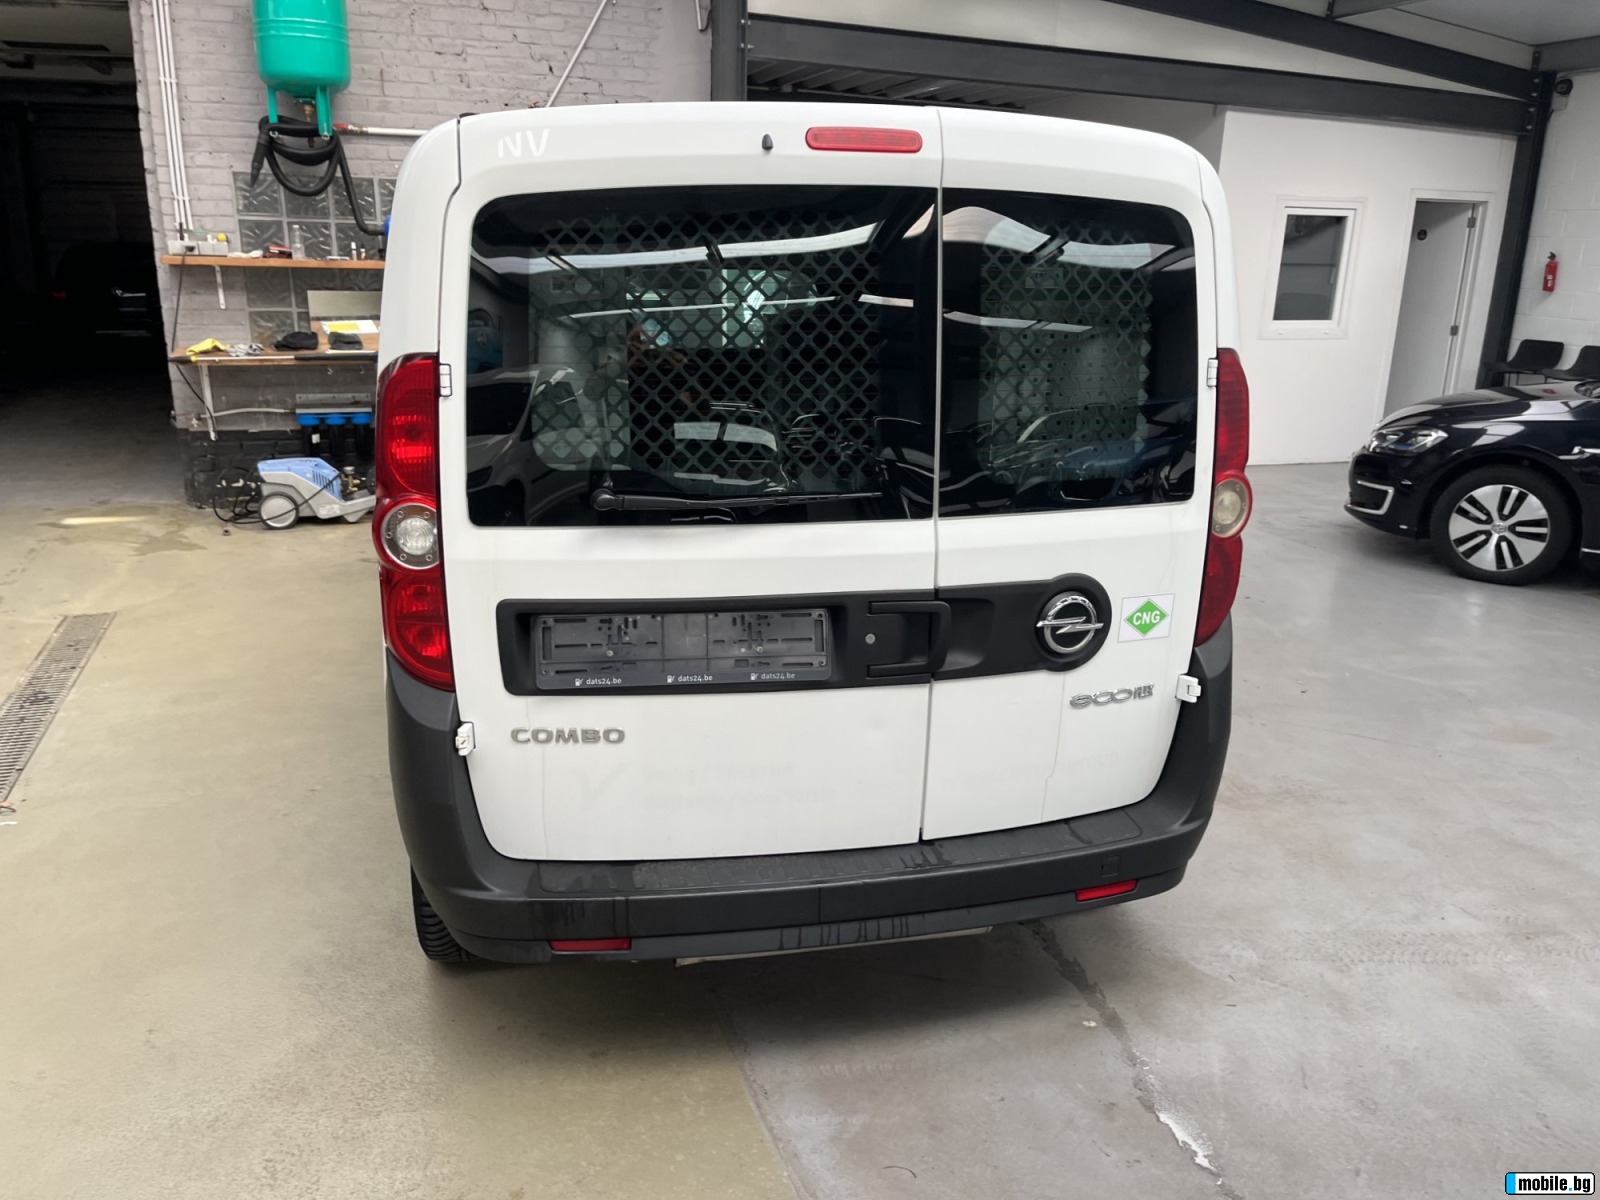 Opel Combo  CNG | Mobile.bg   8